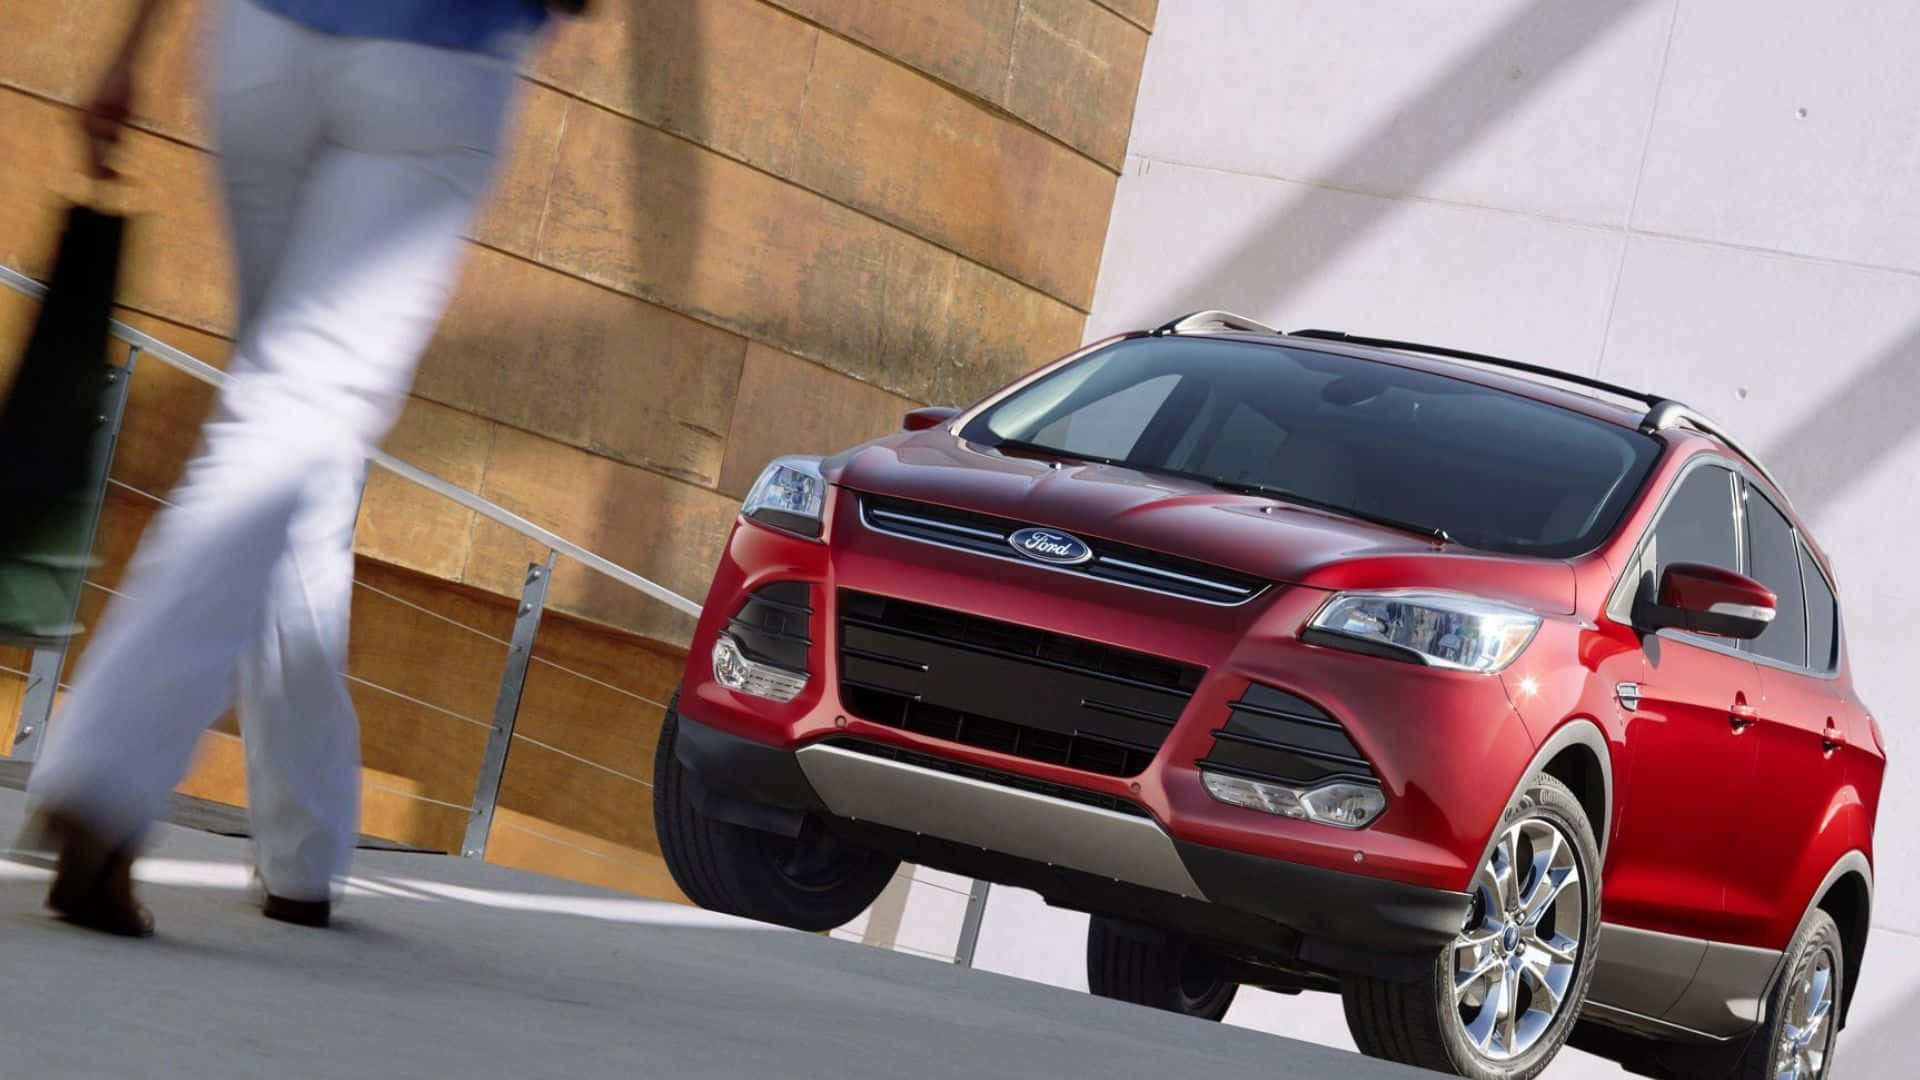 Sleek Ford Escape cruising on the highway Wallpaper